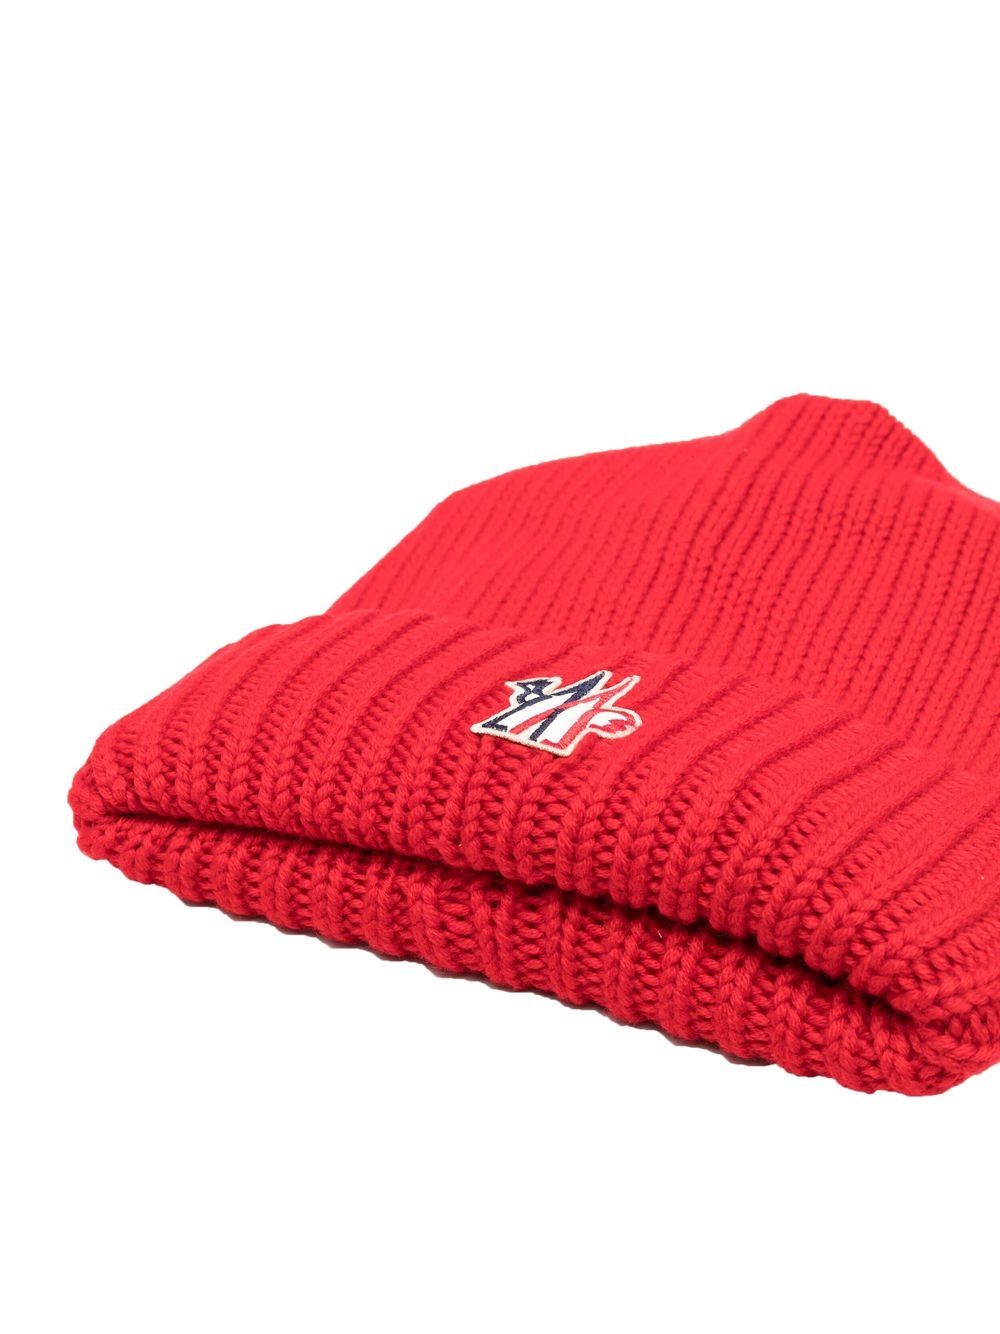 Moncler Grenoble Muts met logopatch - Rood